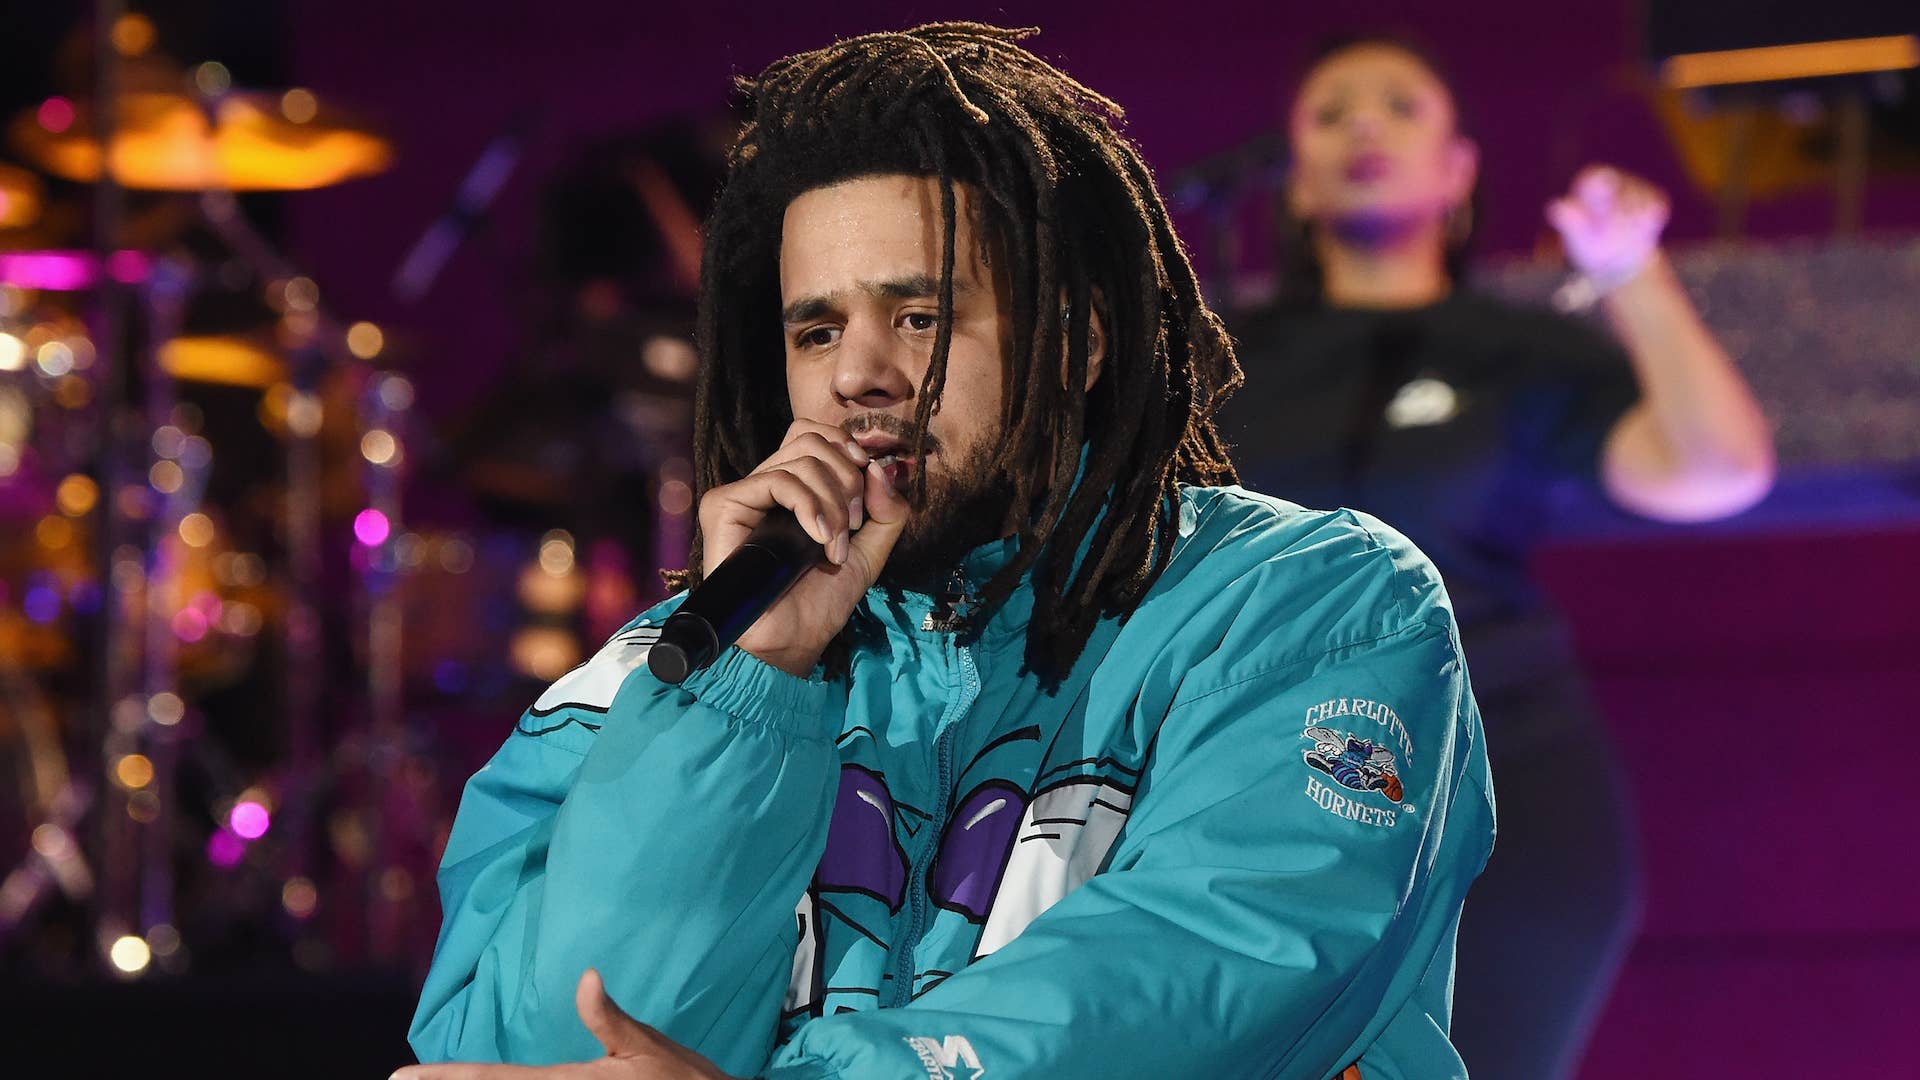 J. Cole performs at halftime during the 68th NBA All Star Game